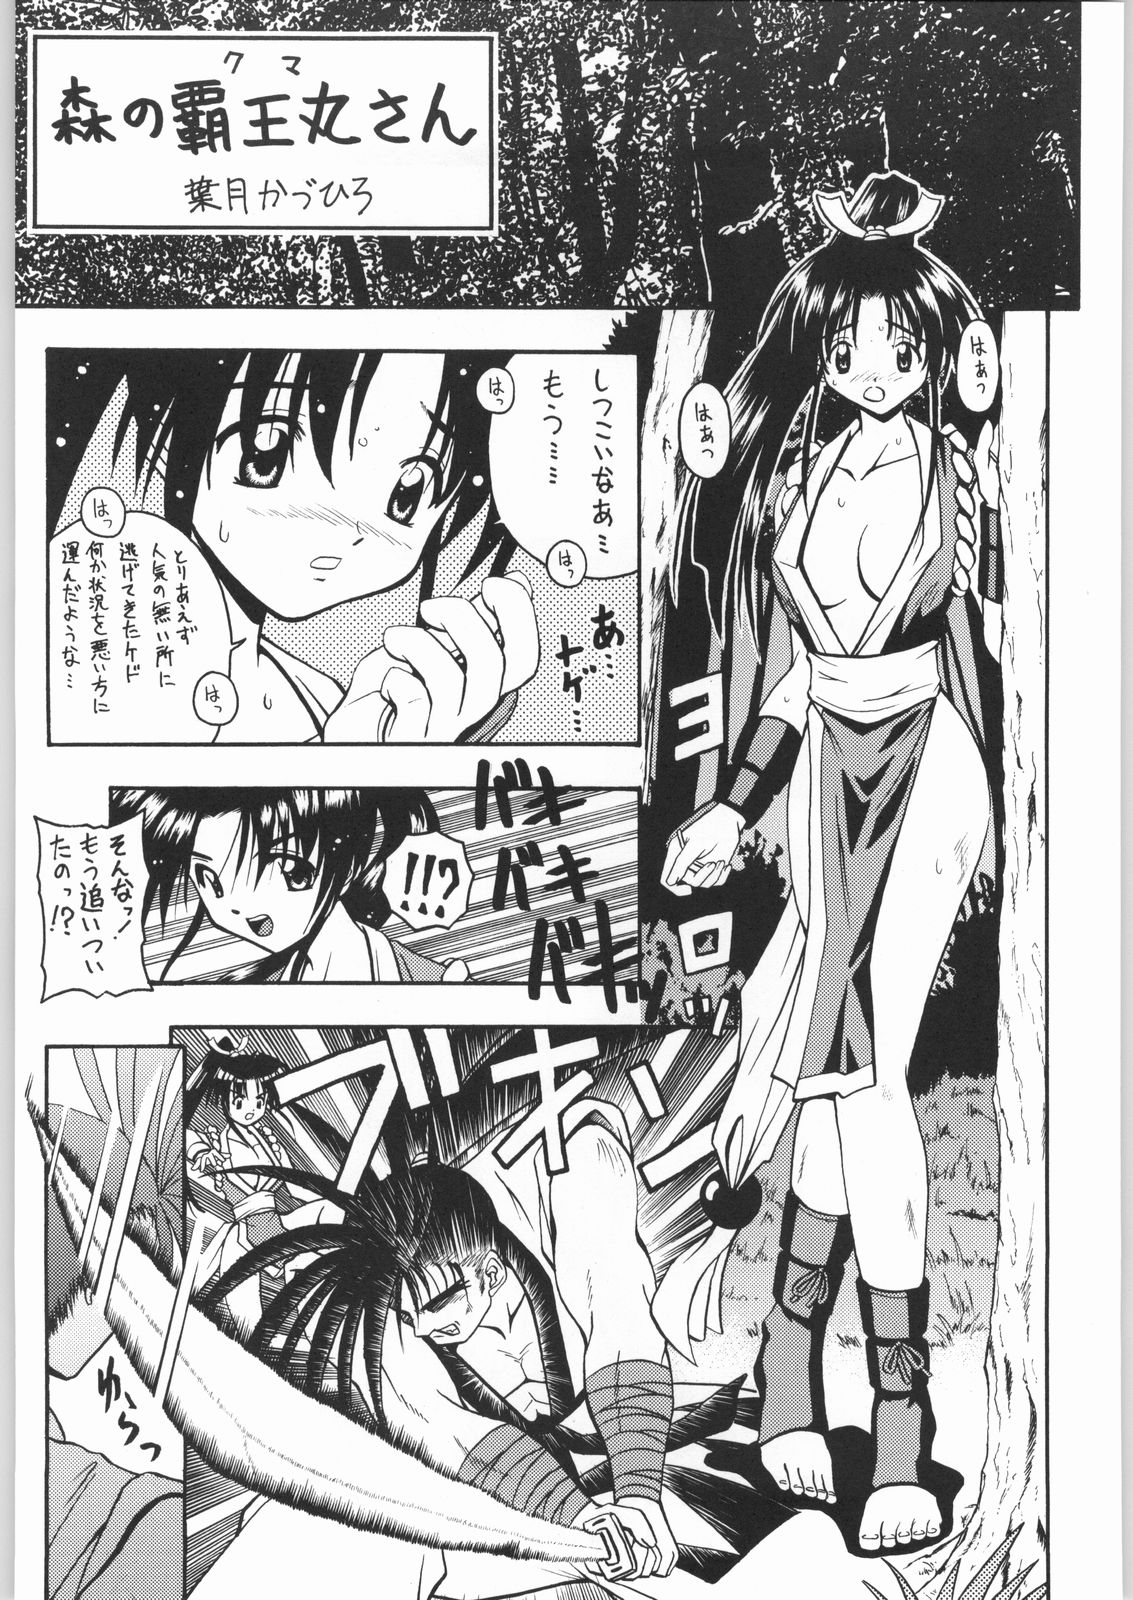 [SNK] Shiranui (Over Flows) page 36 full